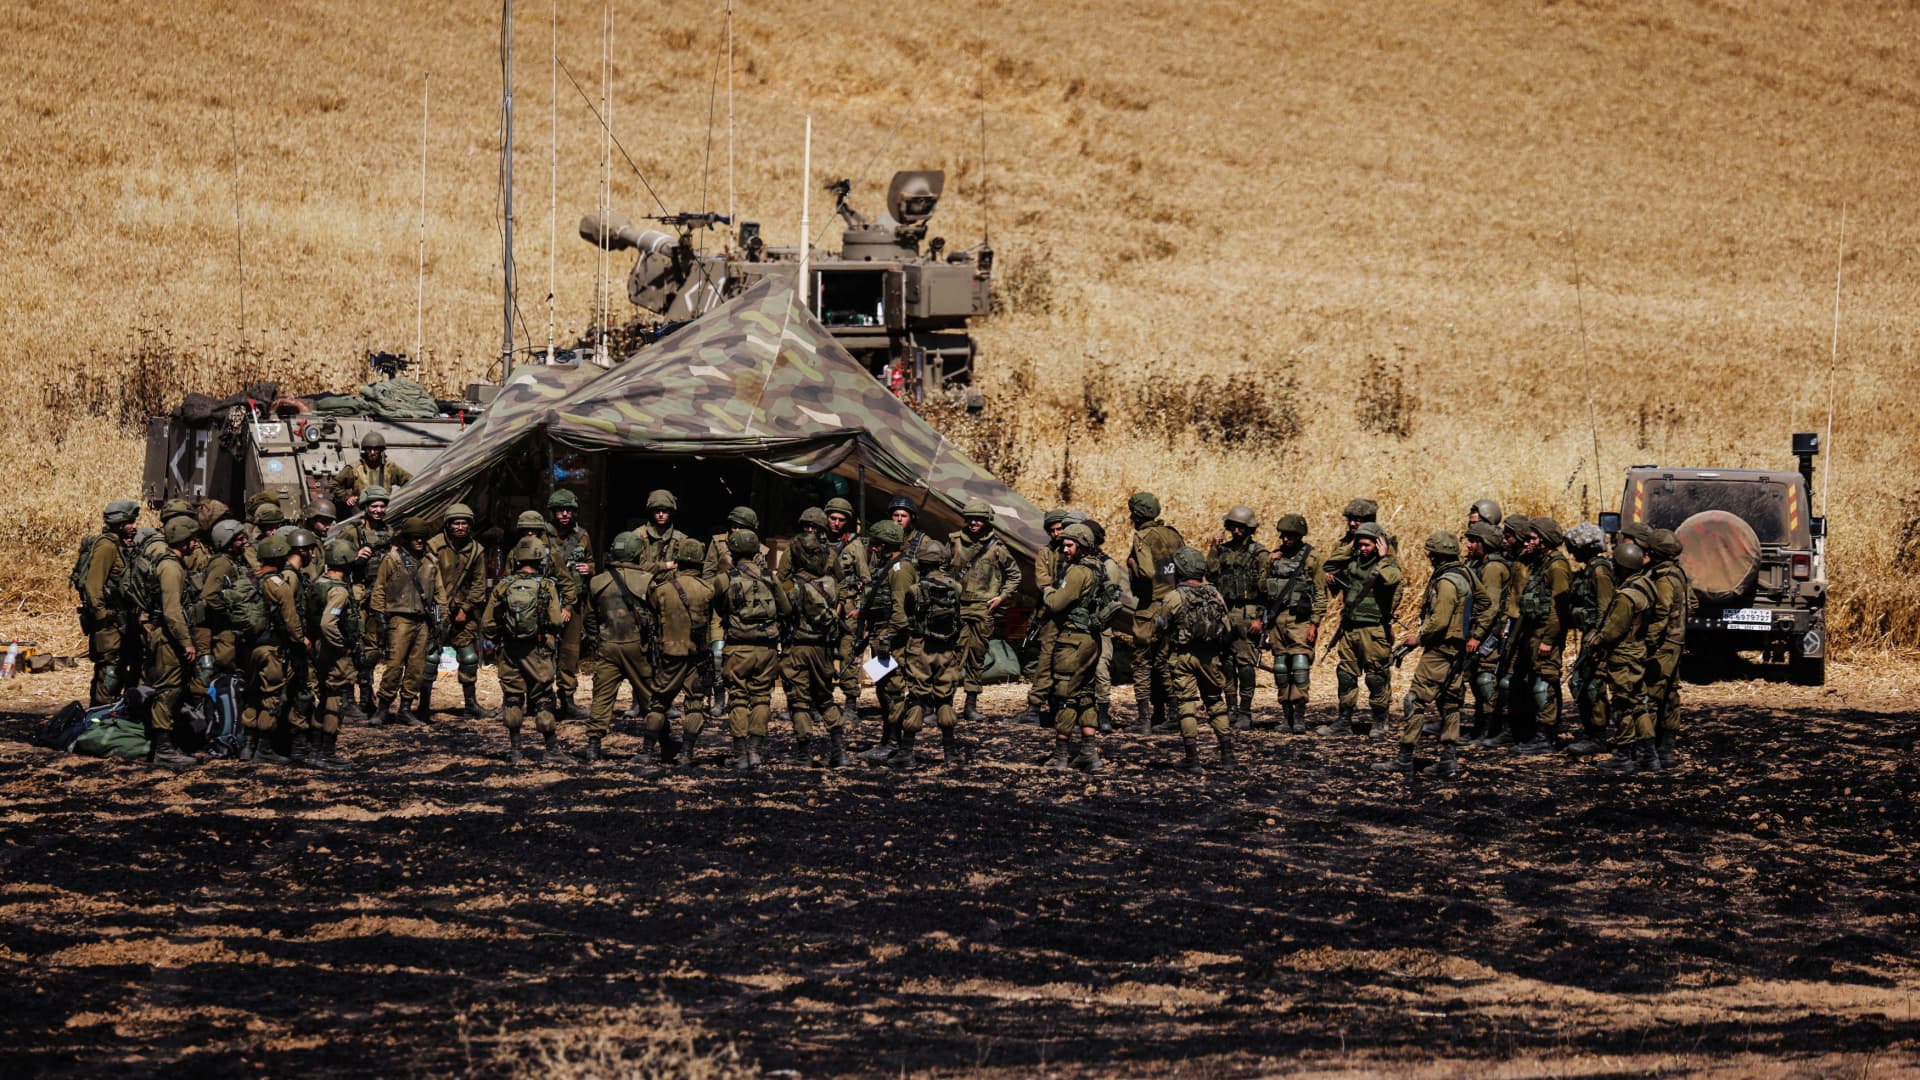 Israeli soldiers of an artillery unit gather near the border between Israel and the Gaza Strip, on its Israeli side May 14, 2021.